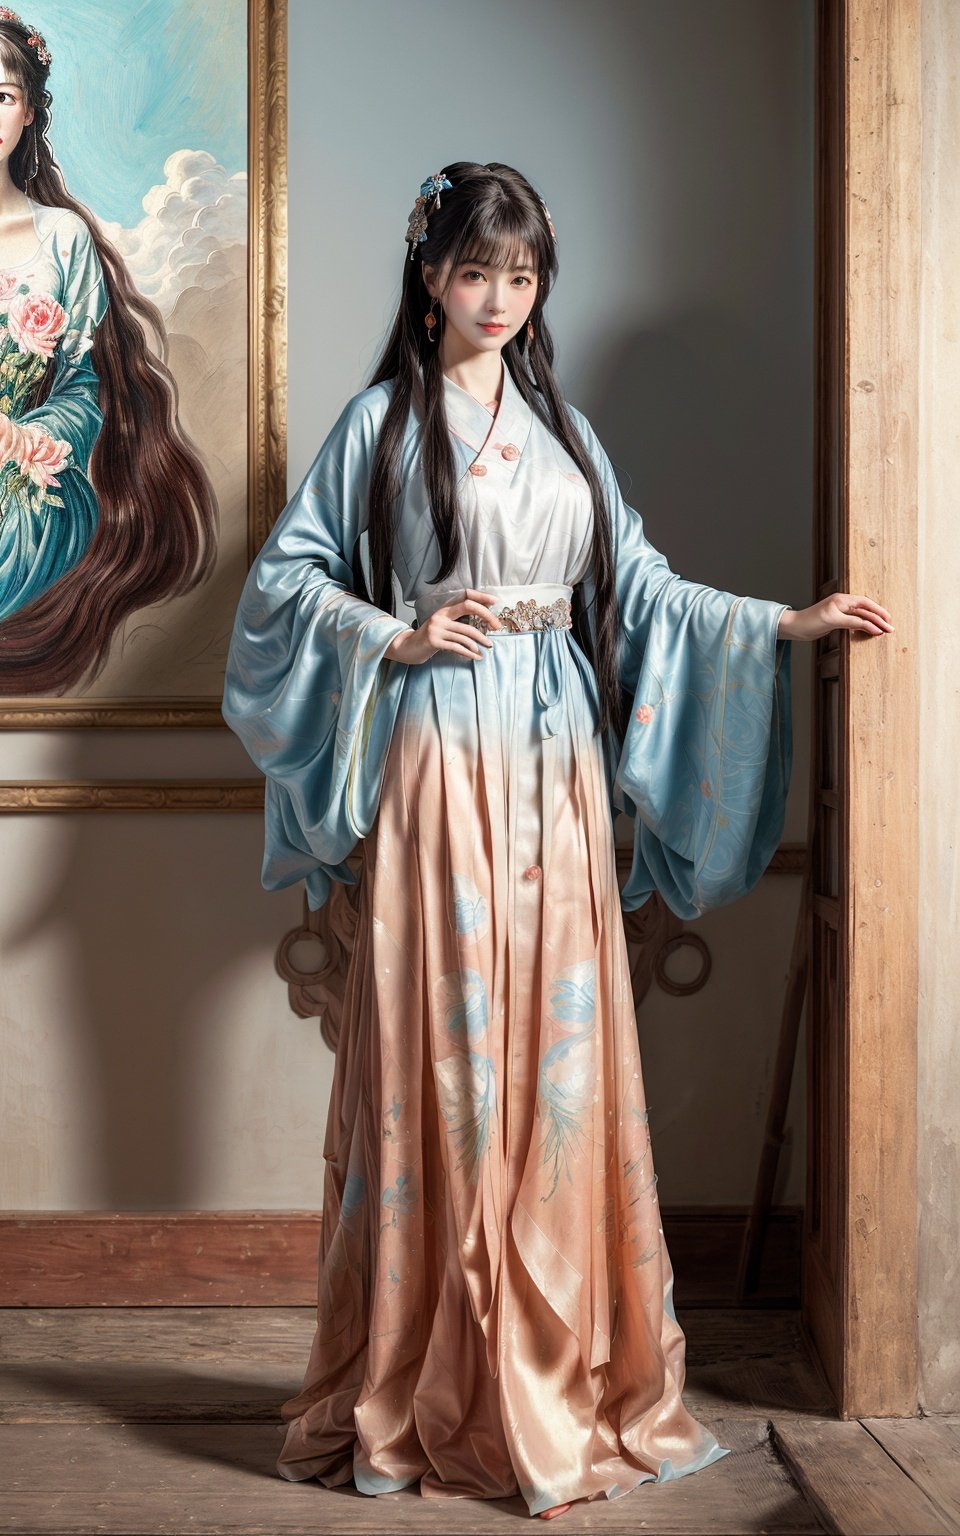 (best quality:1.4), ((masterpiece)),((realistic)), (detailed),(photorealistic:1.4), the painting shows a woman standing behind the clouds,in the style of fang lijun, love and romance, uemura shoen, (light white and light blue:1.1), flowing draperies, fresco painting, naomi tydemanDali style,